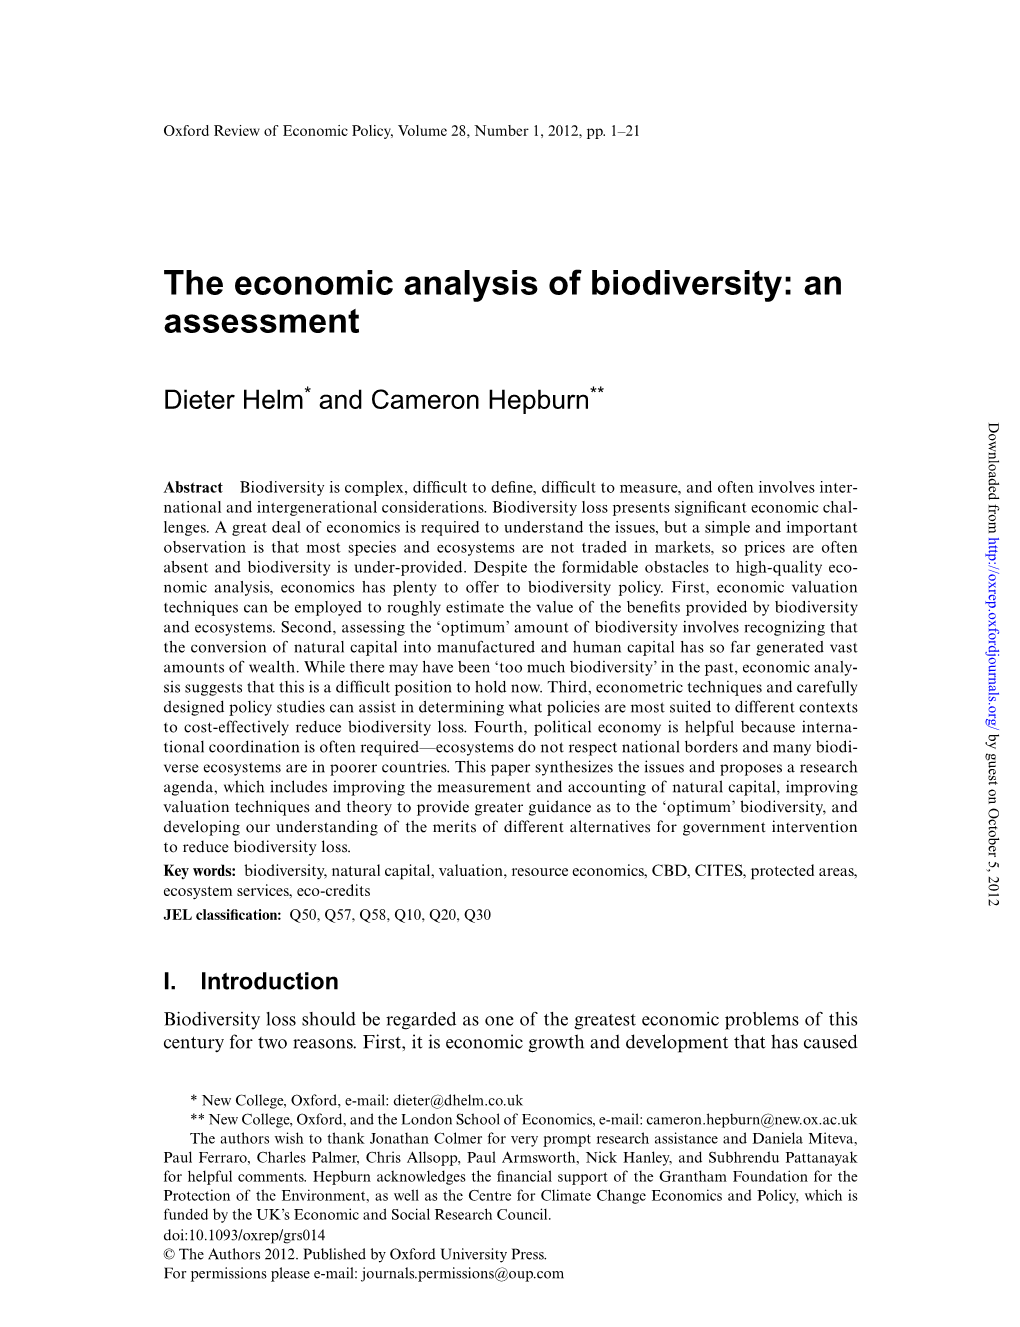 The Economic Analysis of Biodiversity: an Assessment